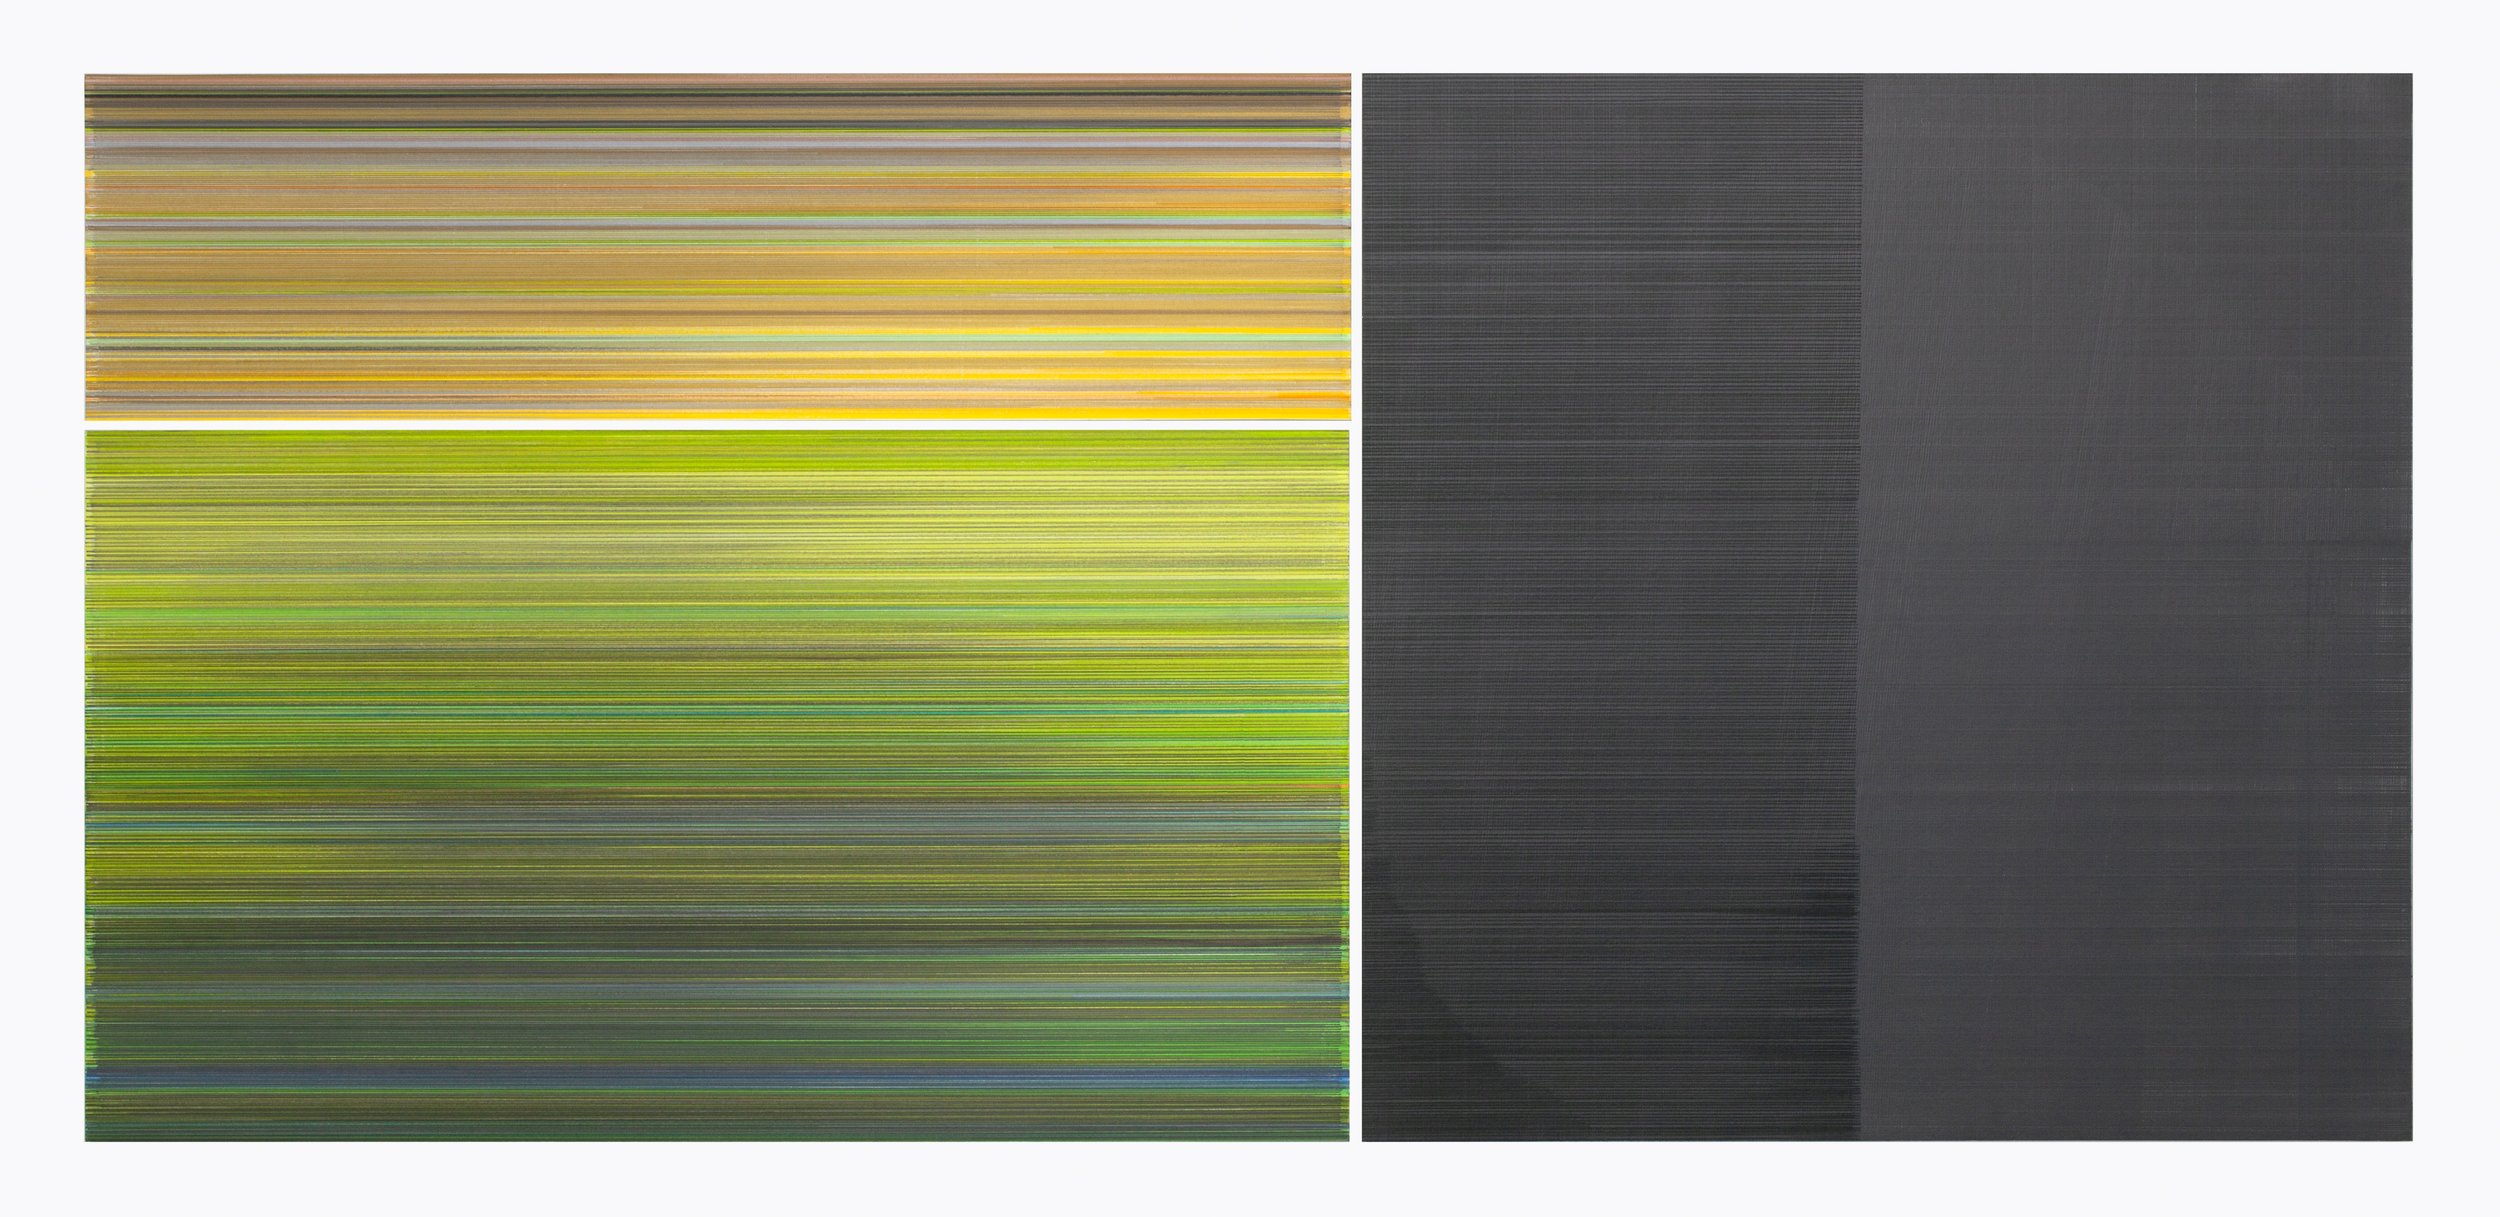    velvets   2023 graphite and colored pencil on mat board 30 x 68 inches (in three panels) 